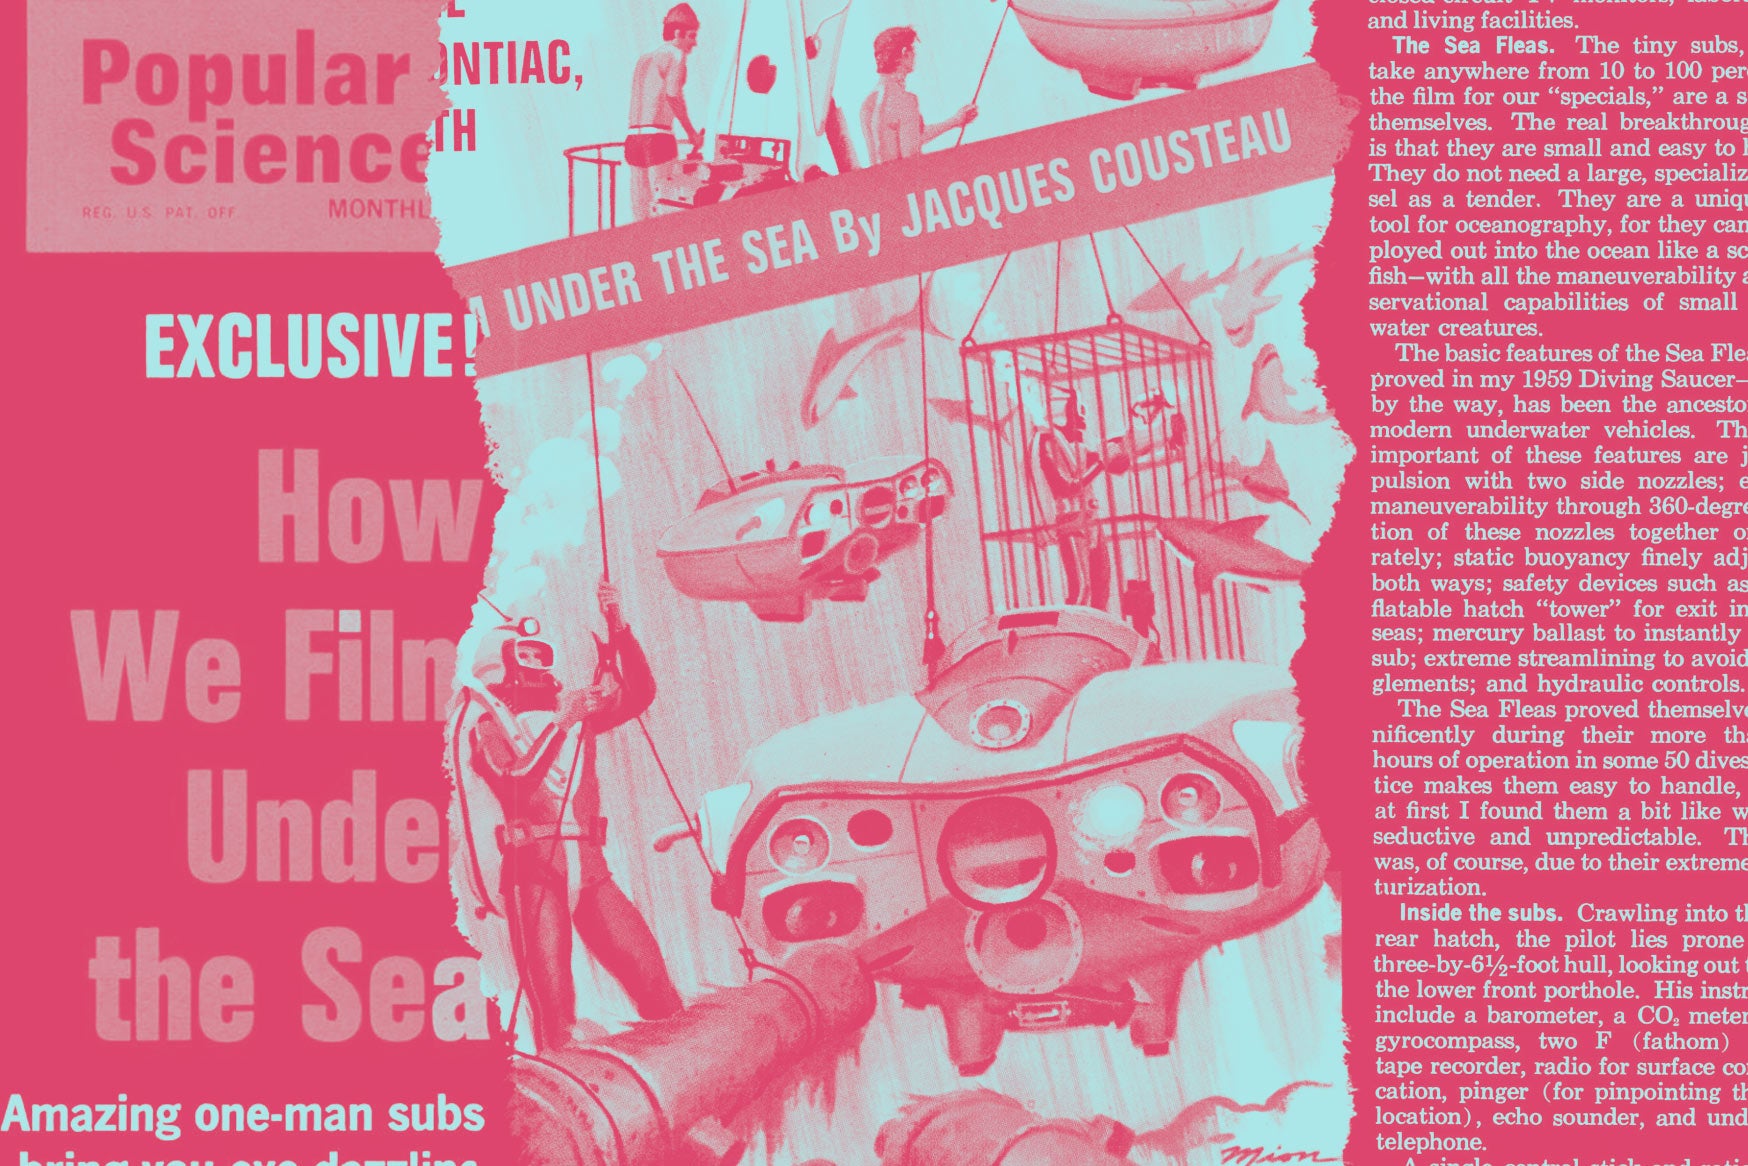 From the archives: Jacques Cousteau shows off his underwater film technology thumbnail